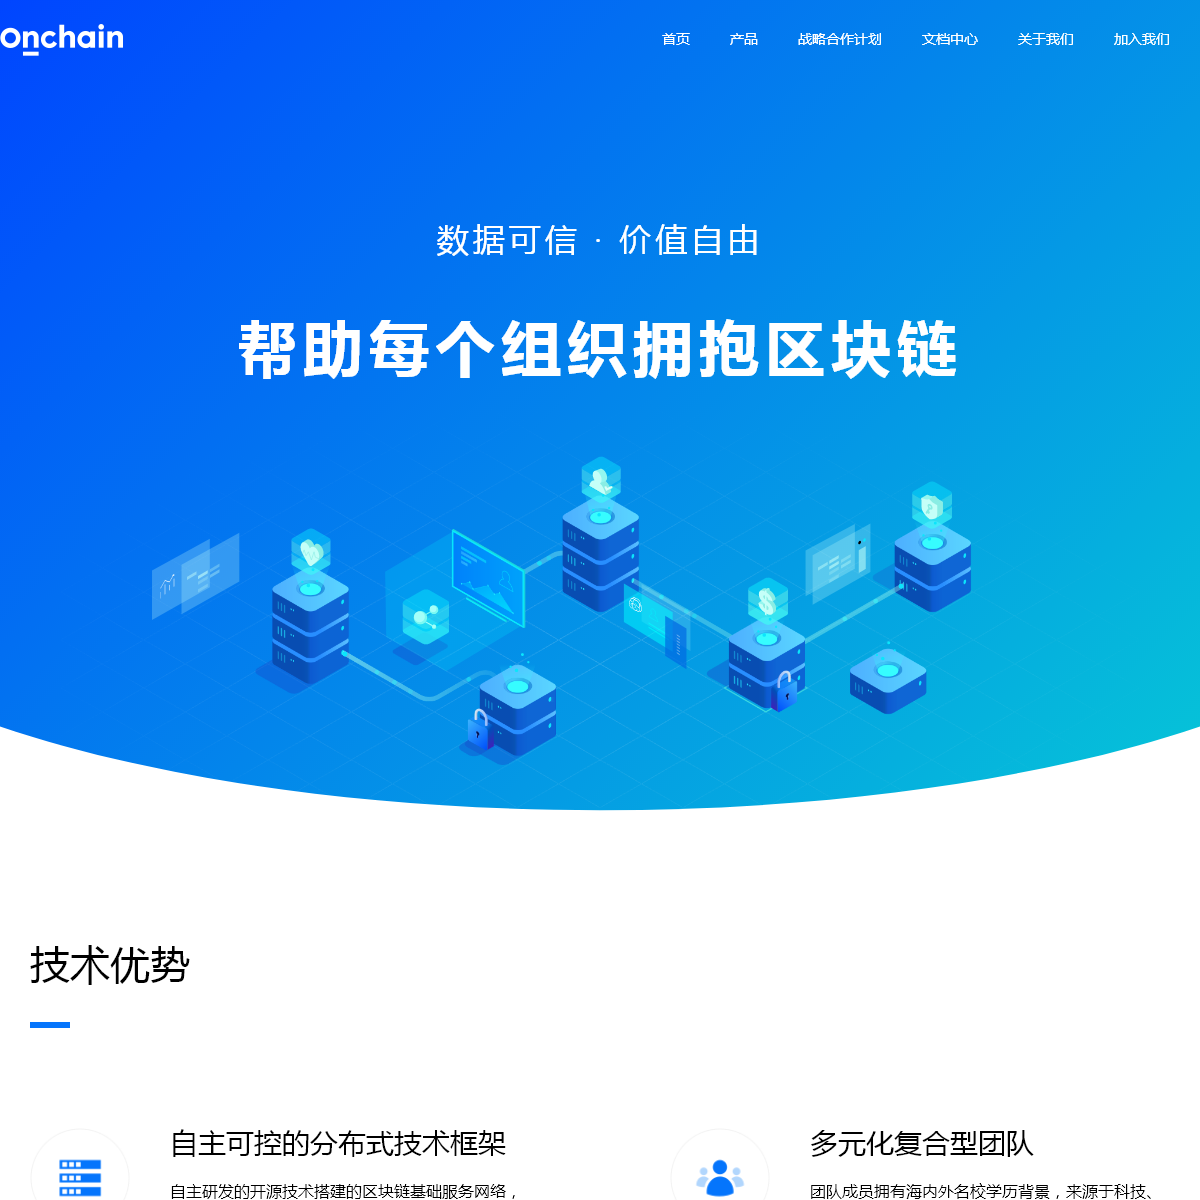 A complete backup of onchain.com